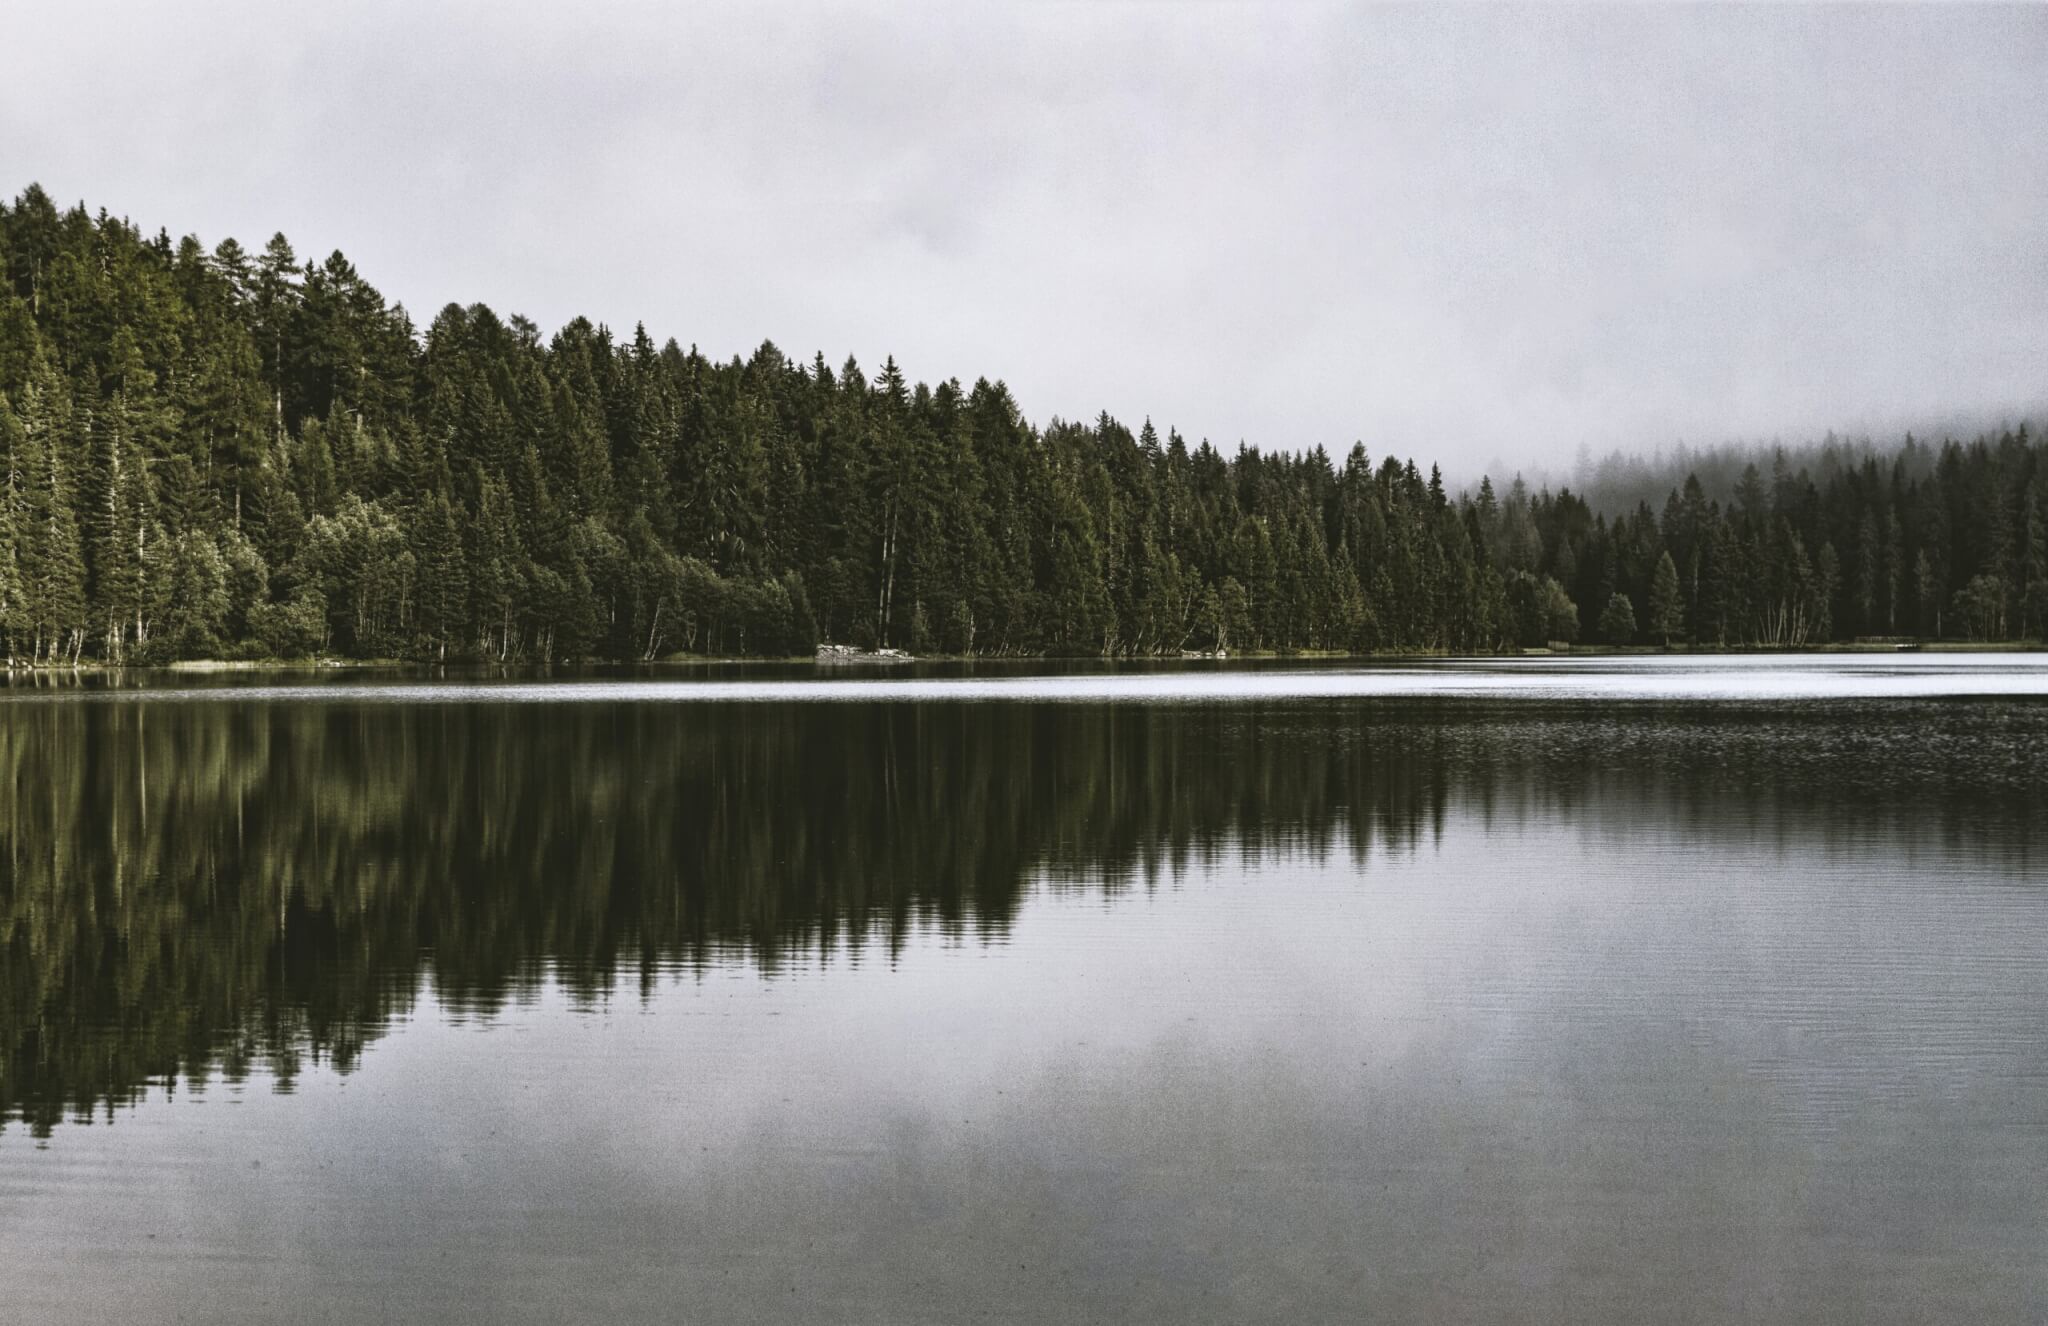 Lake and pine trees on the background on a fuggy day